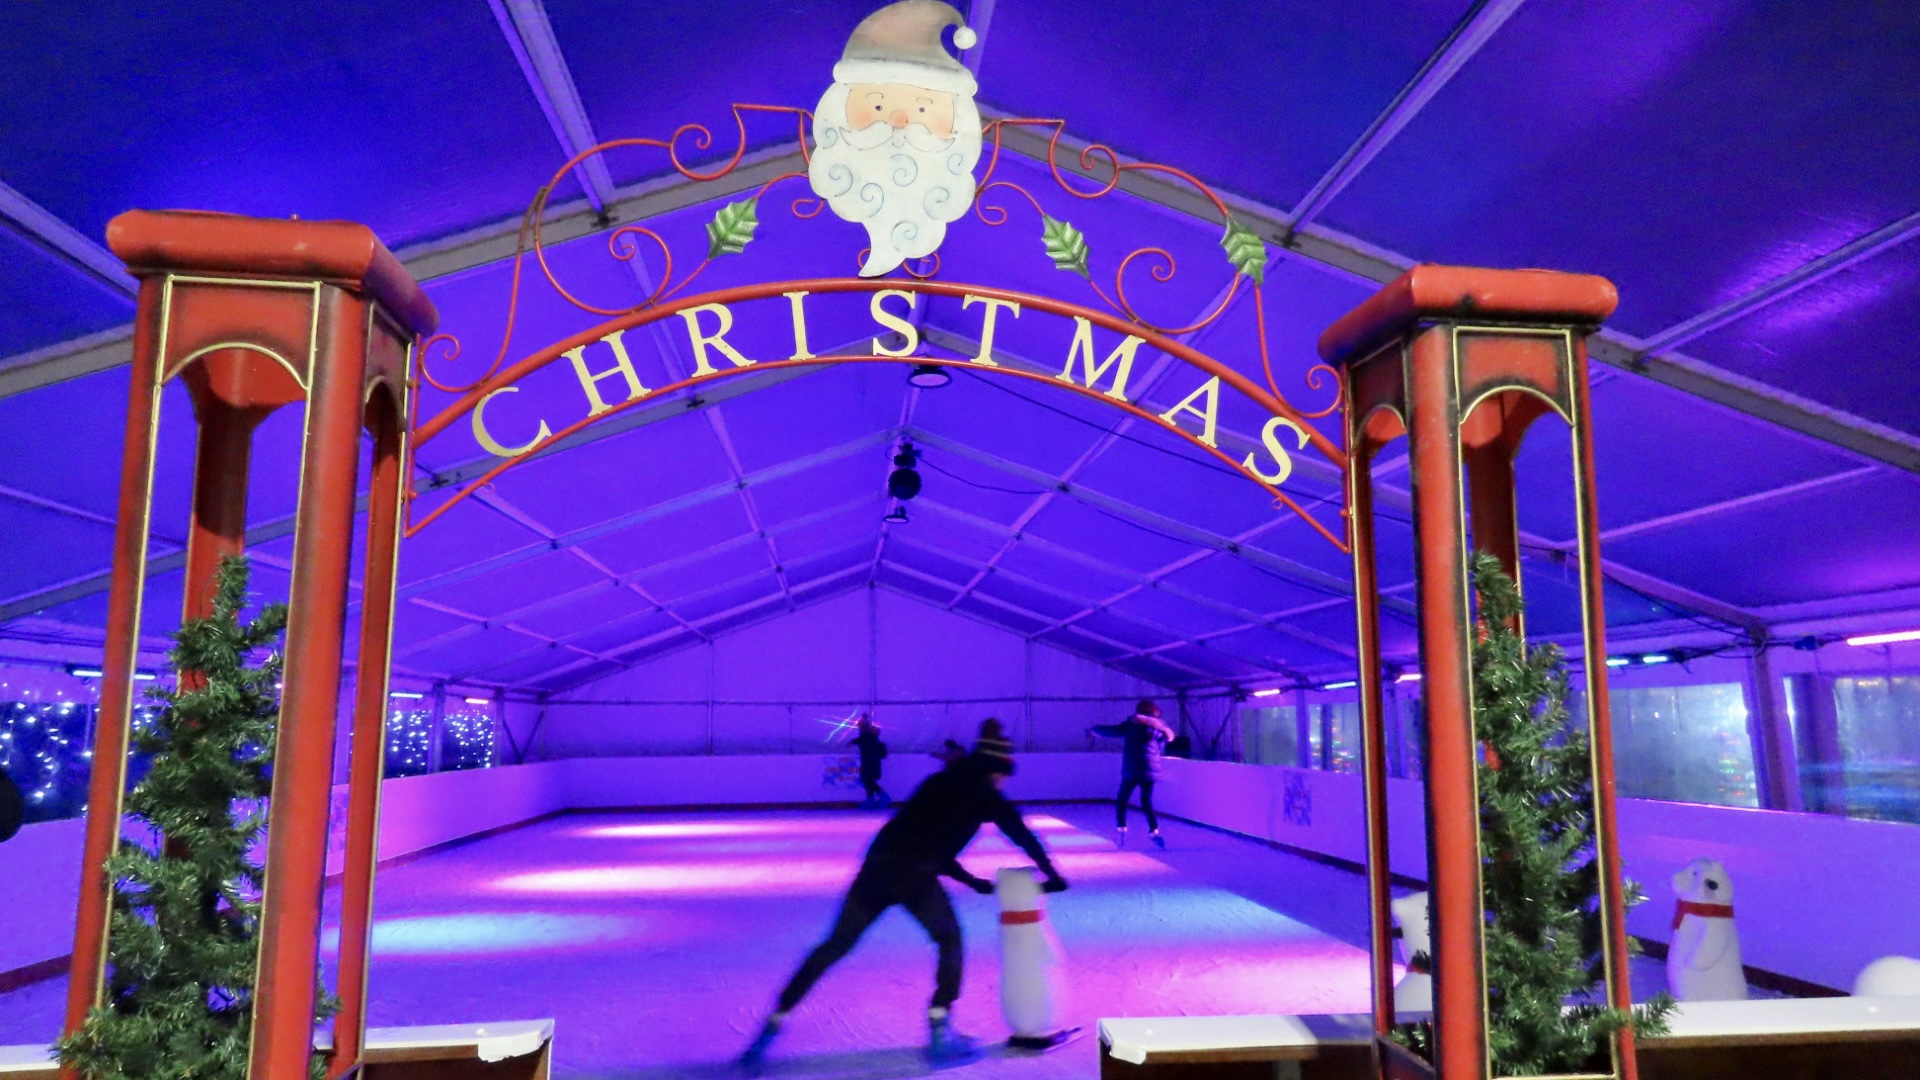 An ice skating rink, run by Ice Skating Southport, has opened at Victoria Park in Southport. 